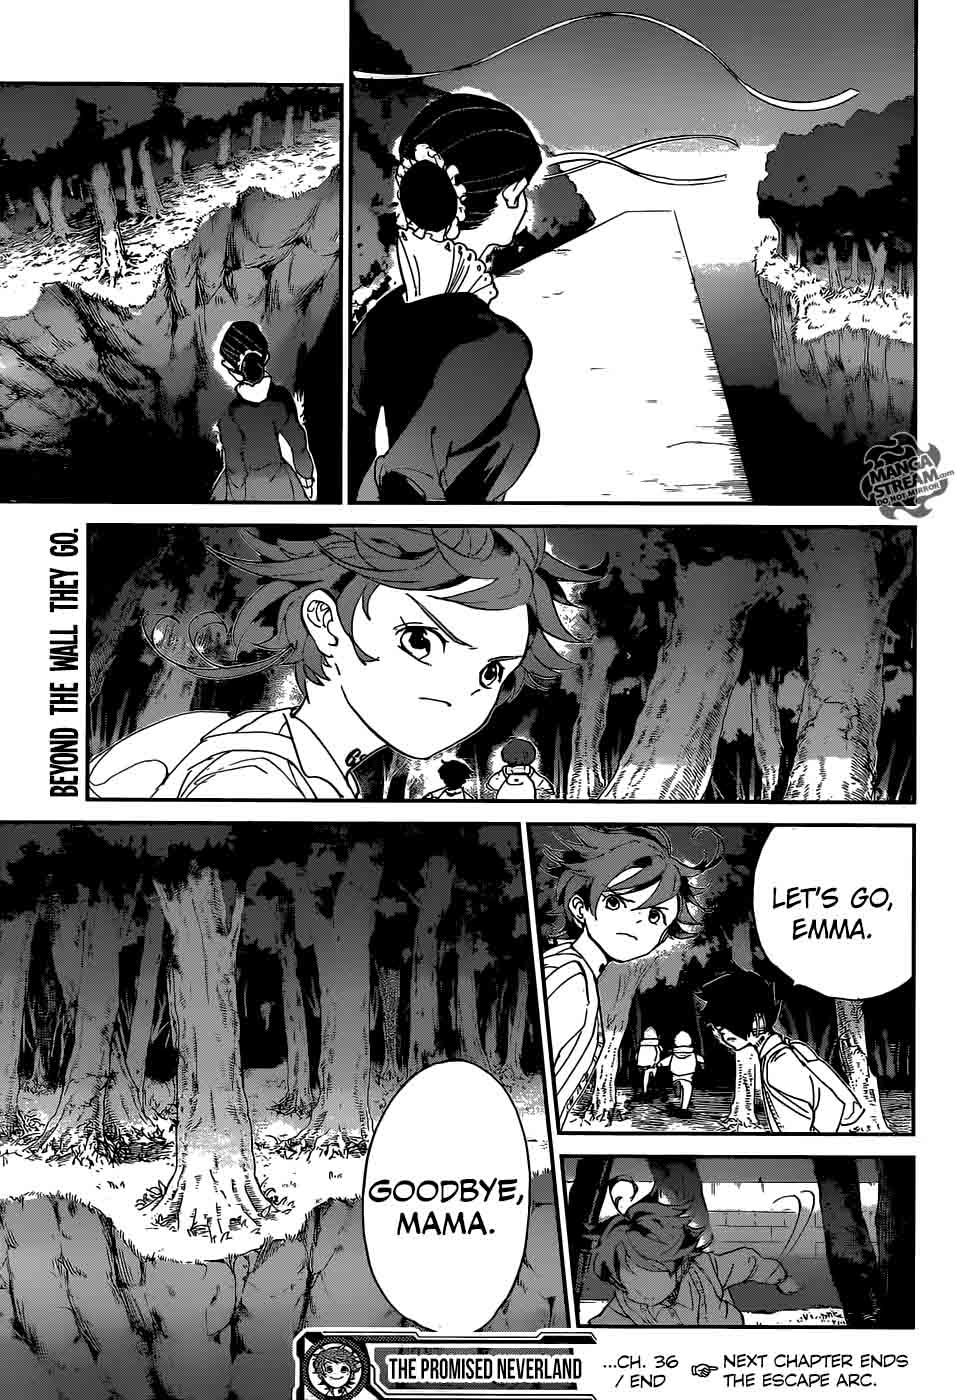 The Promised Neverland 36 17